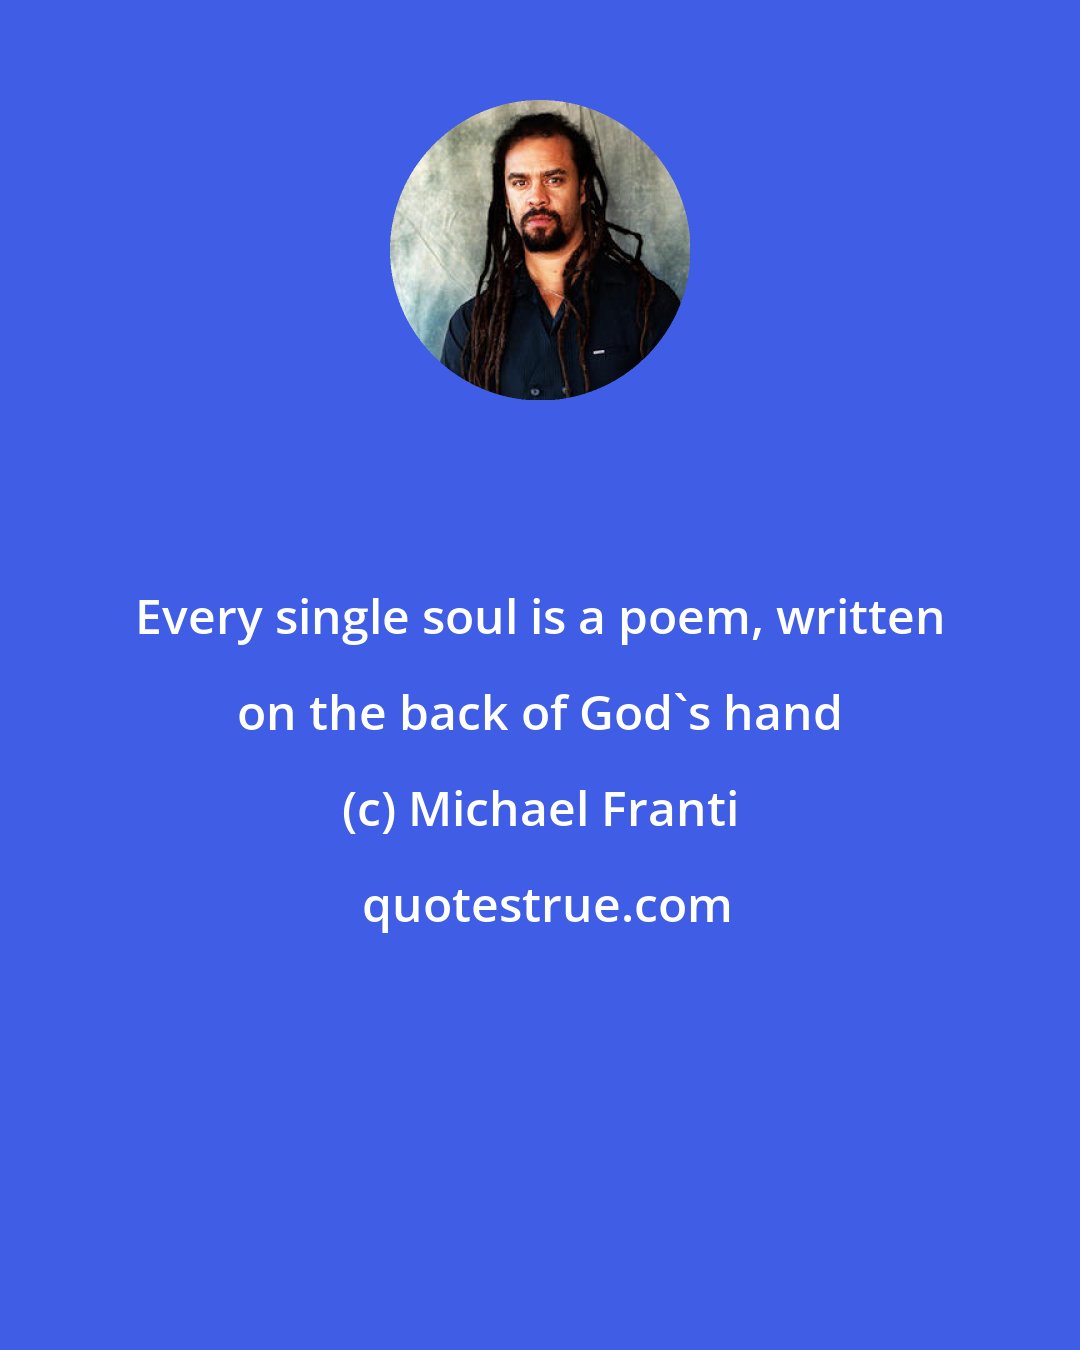 Michael Franti: Every single soul is a poem, written on the back of God's hand